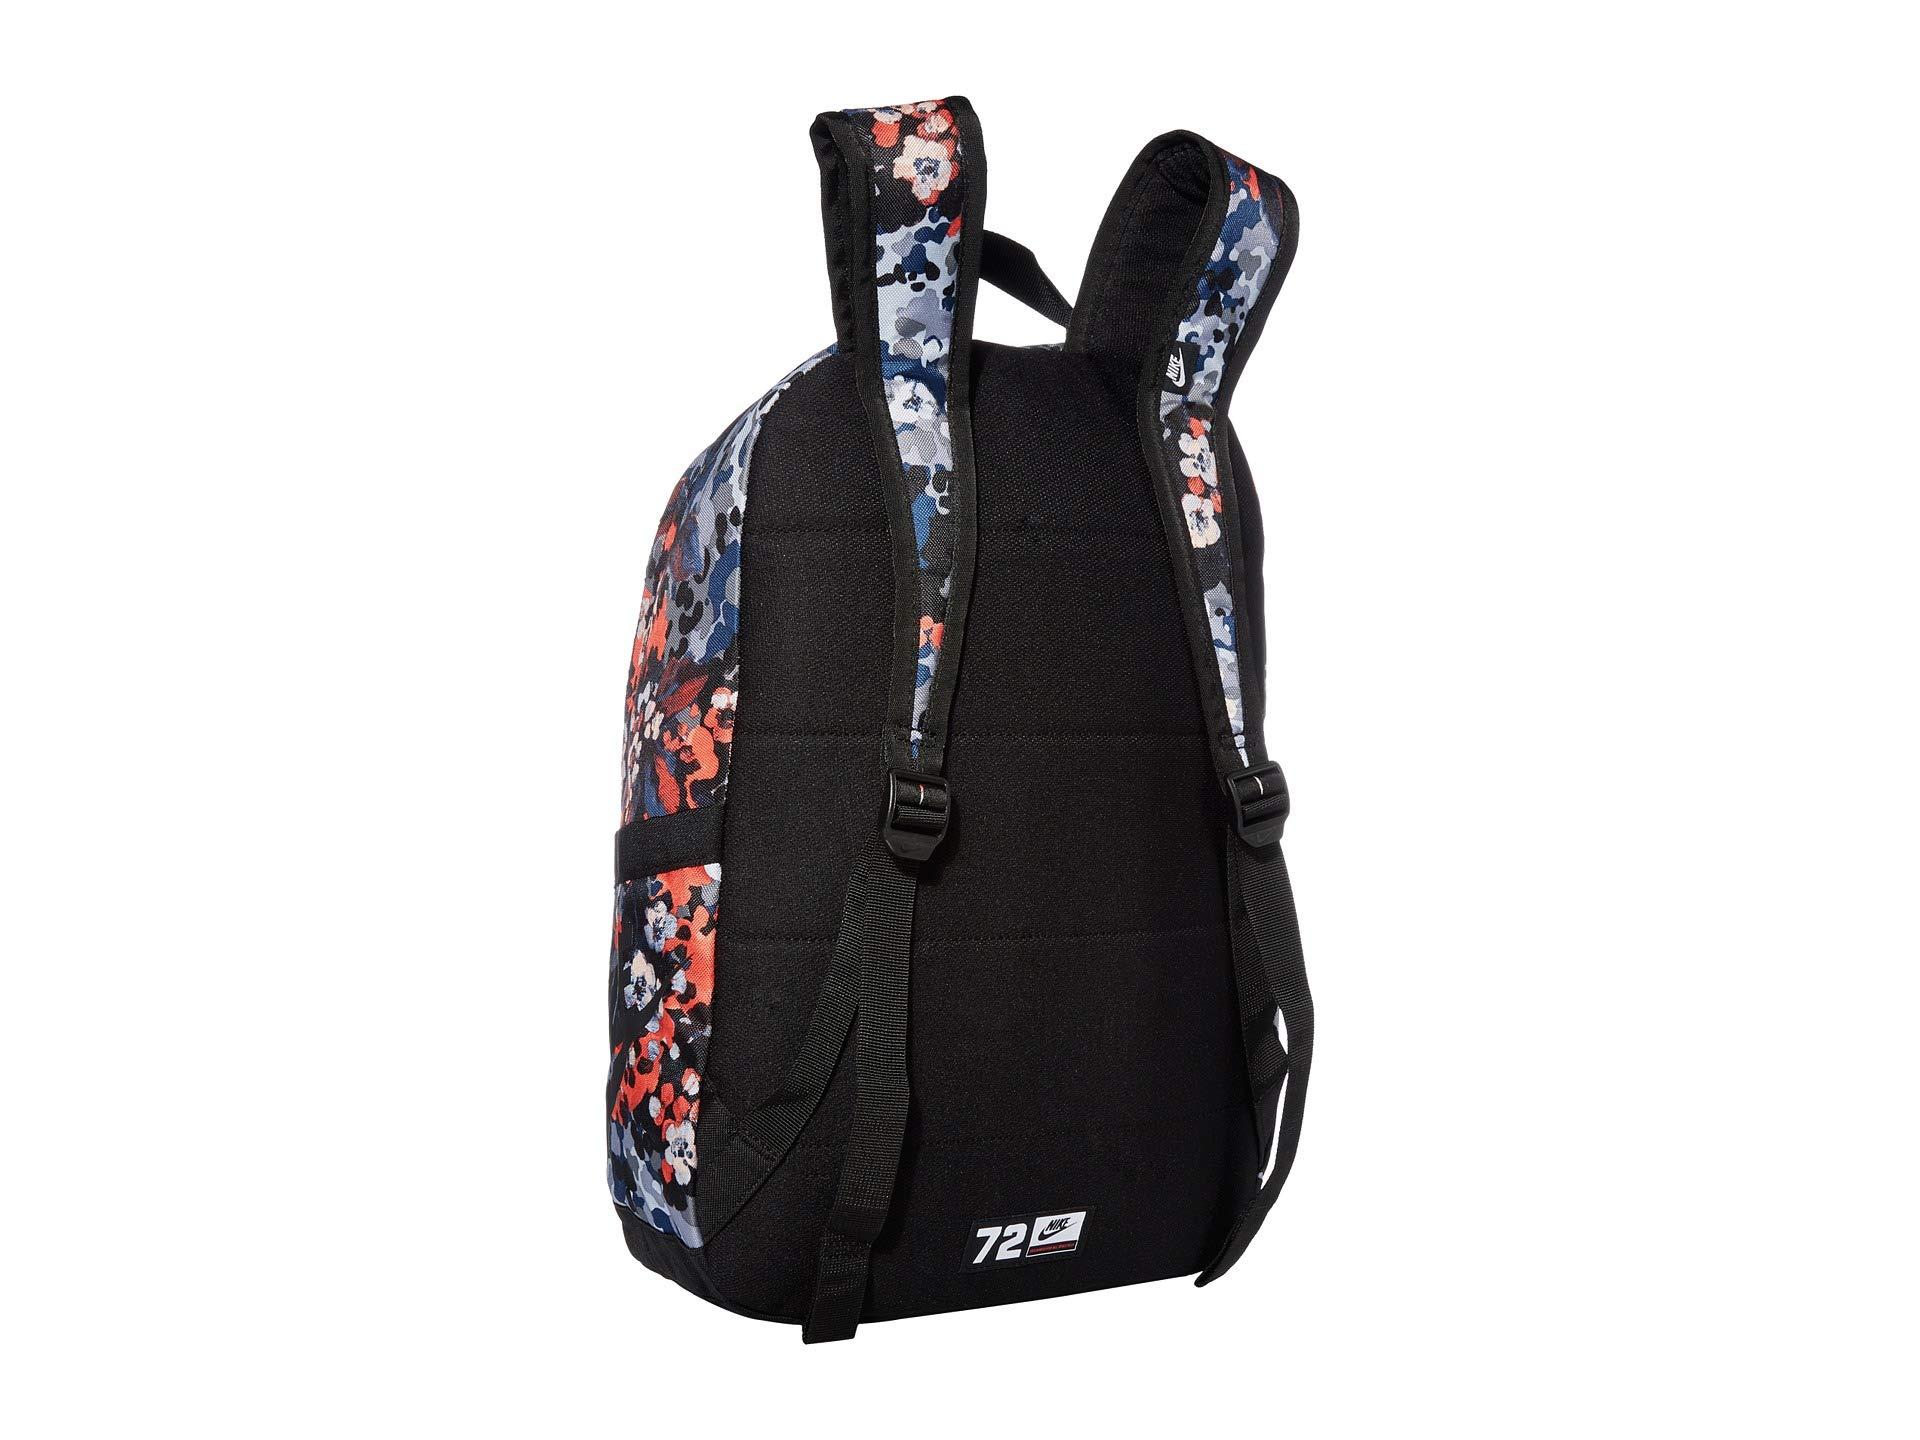 Nike All Access Soleday Backpack - 2.0 All Over Print in Navy (Blue) | Lyst